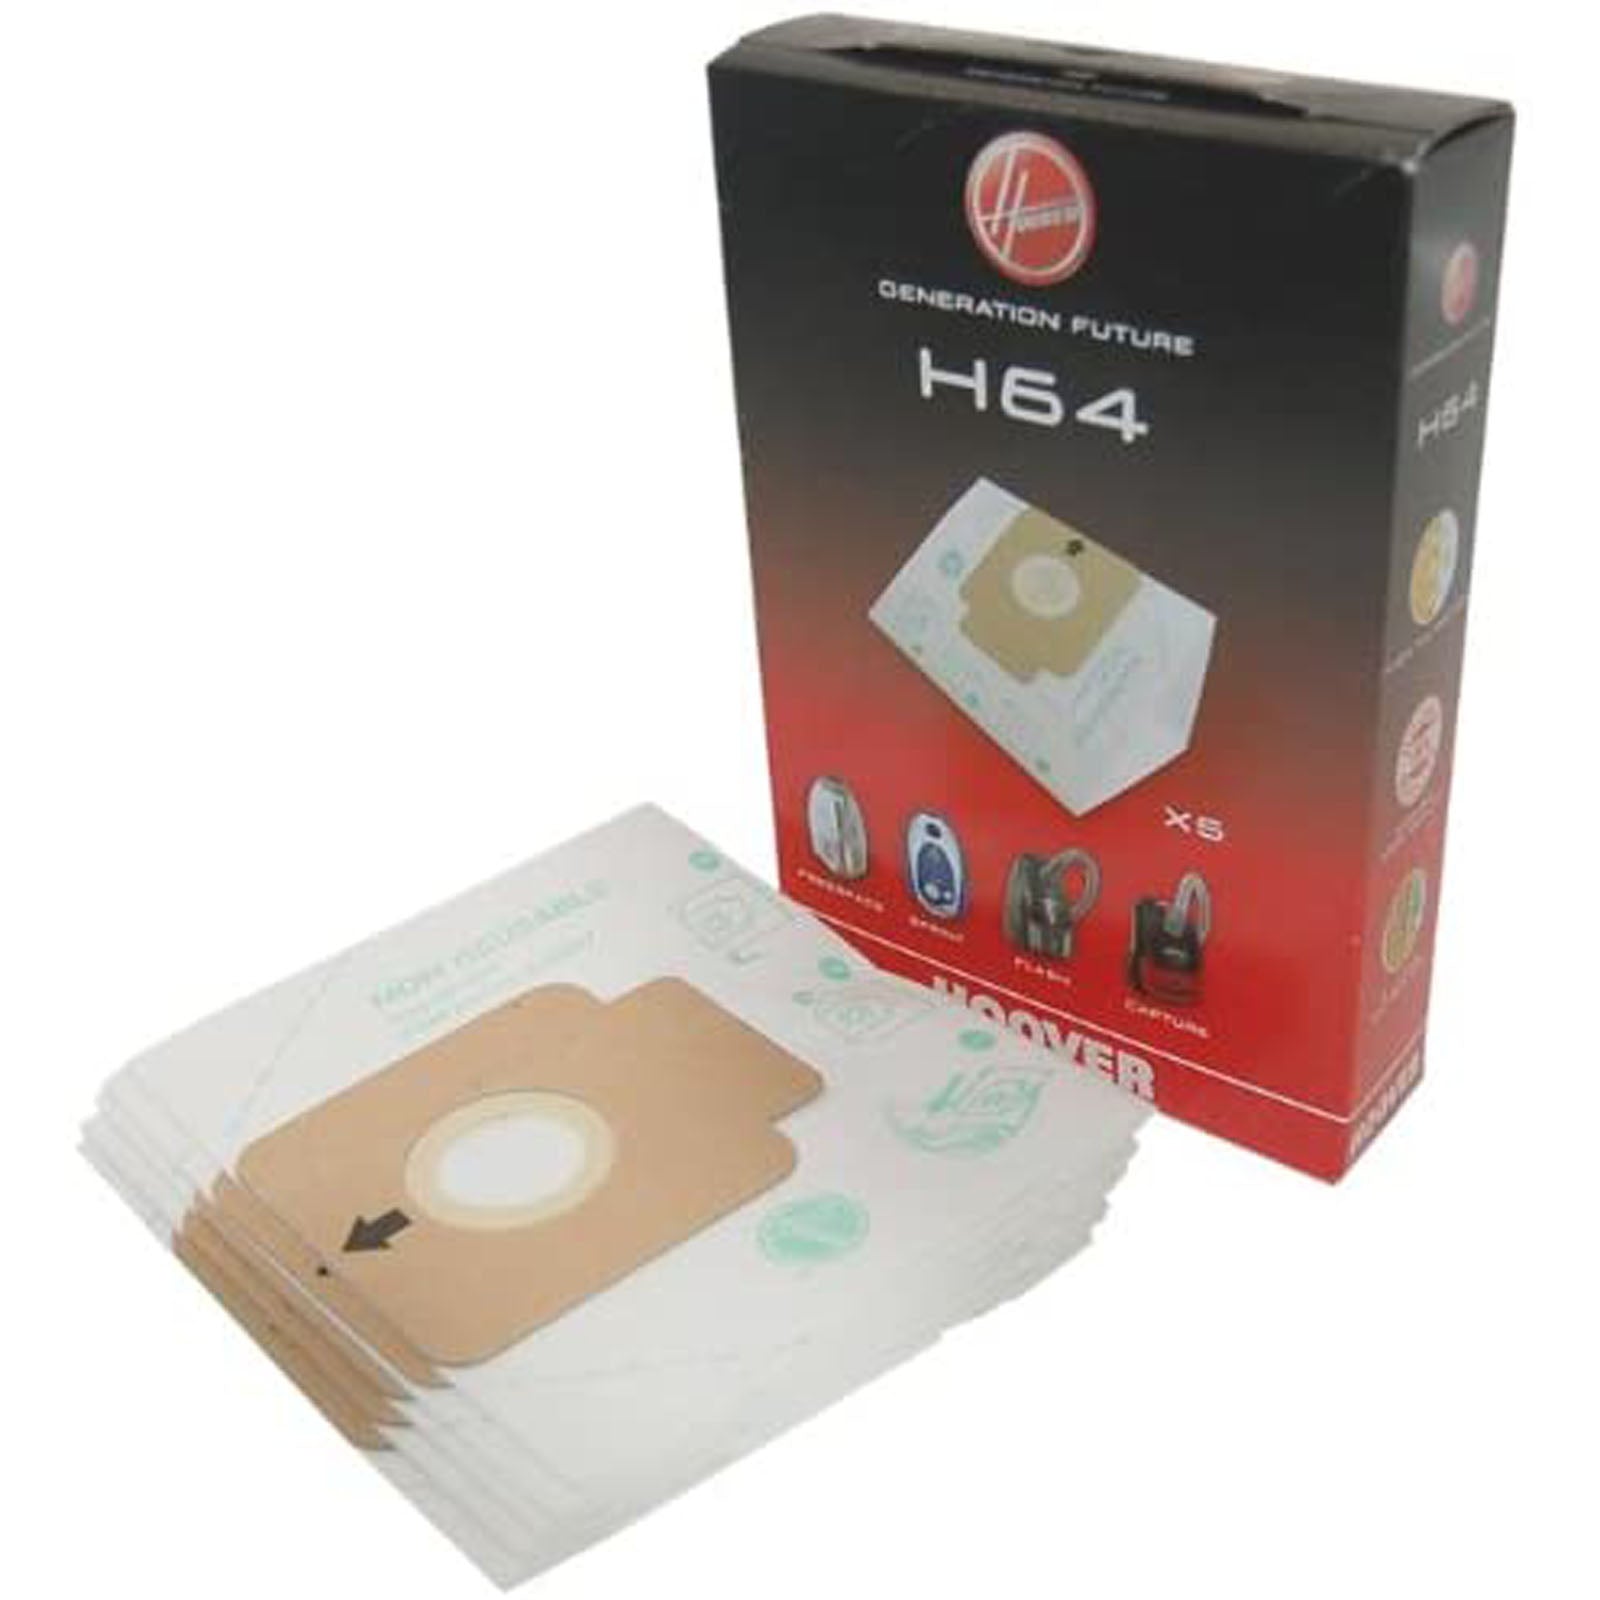 HOOVER Vacuum Cleaner H64 Dust Bag Genuine Freespace Sprint Flash Capture Cylinder 09200245 (Pack of 2) + 10 Fresheners